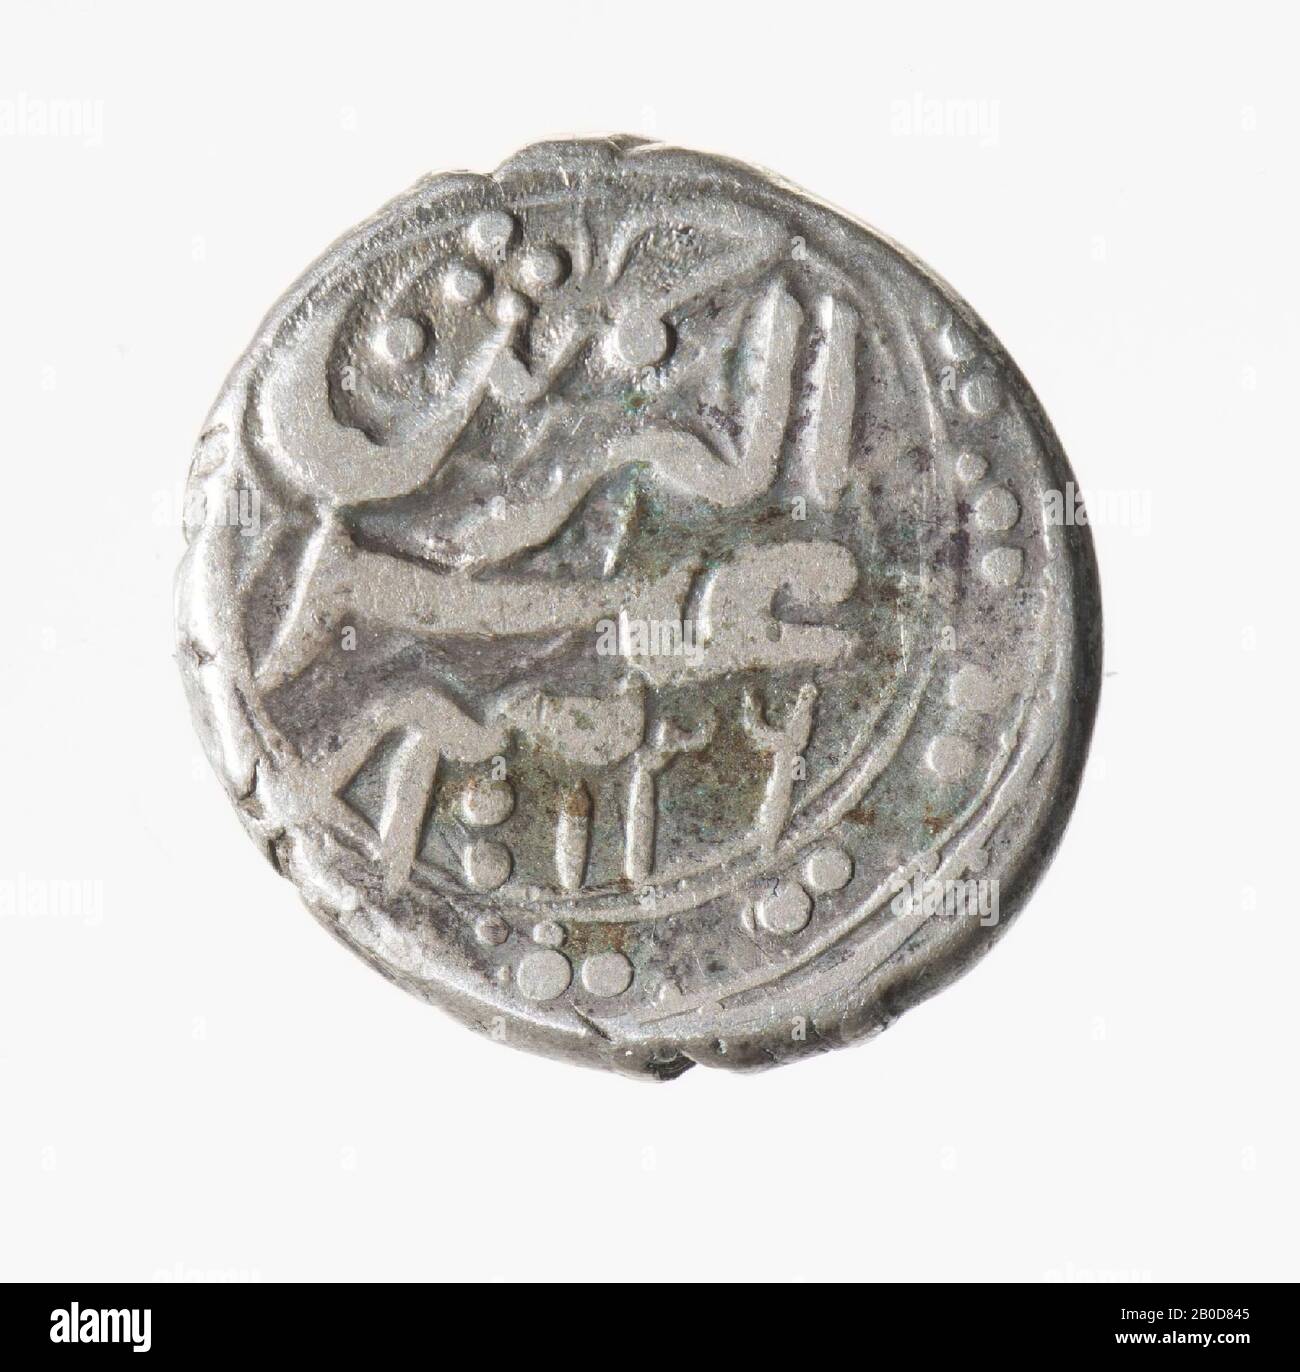 Both sides: Inscription, surrounded by border with double dots. Skew, mint, Arabic? Persian, metal, silver, diam: 1.6 cm, wt. 4.53 grams, unknown Stock Photo